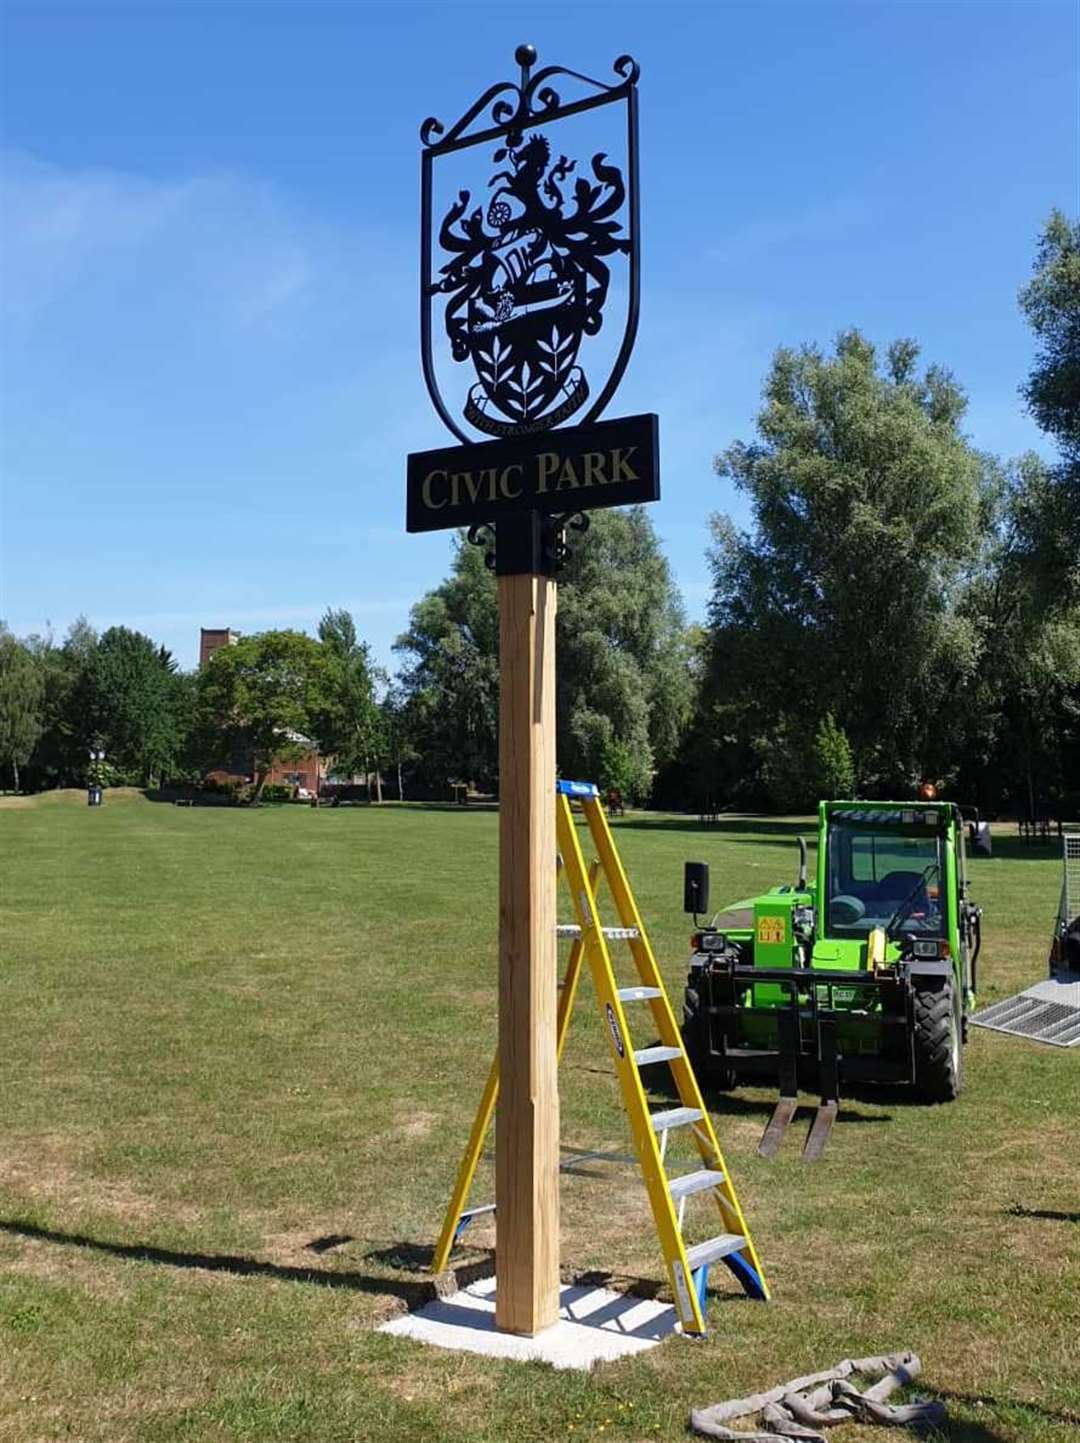 The Civic Park sign by Ashford Borough Council's base in Tannery Lane. Picture: Aspire Landscape Management